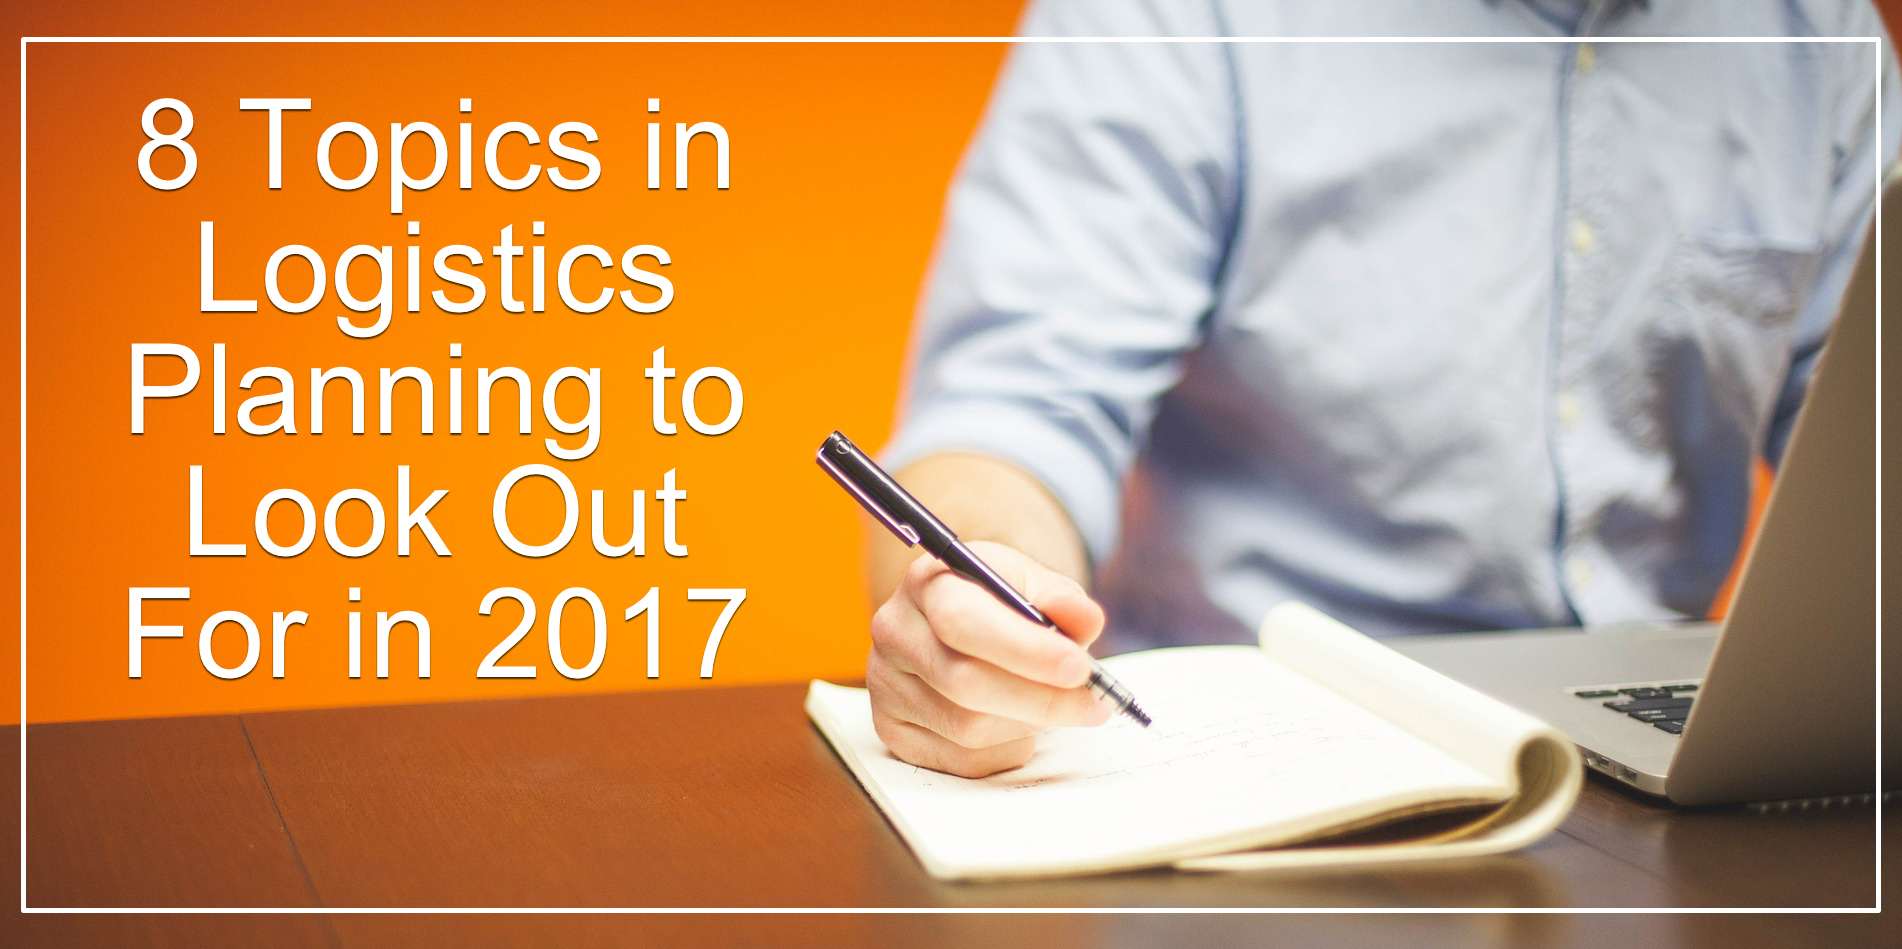 8 Topics in Logistics Planning to Look Out For in 2017